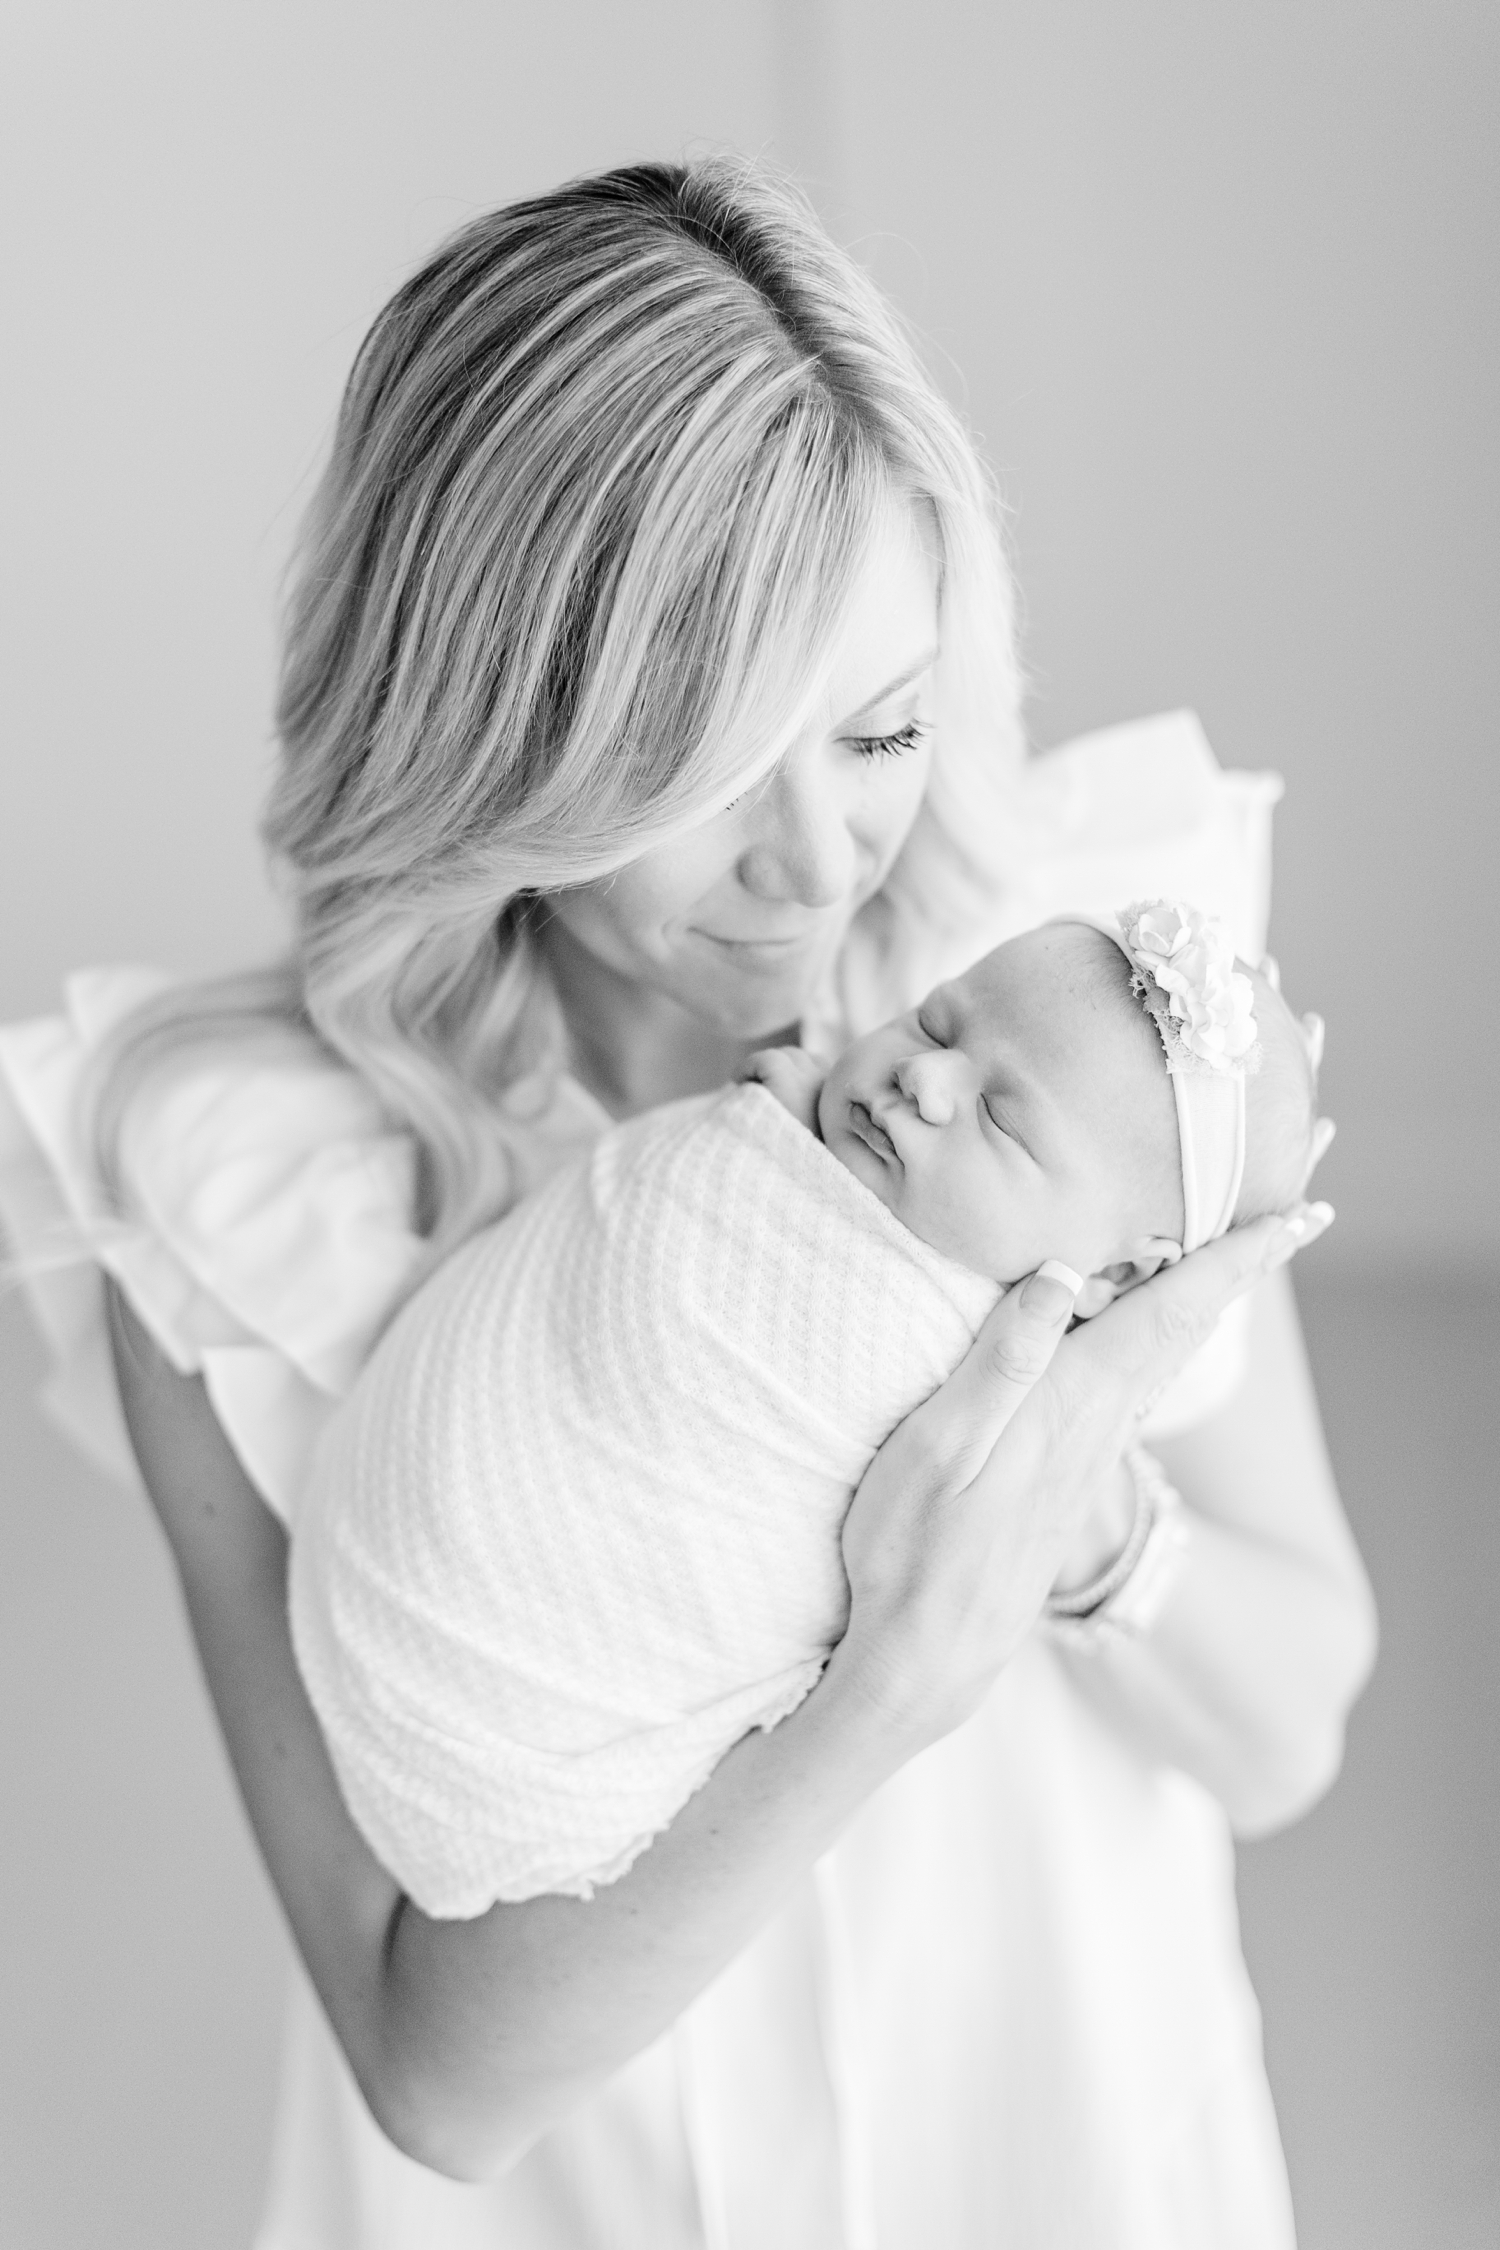 Ashley holds her new baby girl, Jade, as she's swaddled up in white cloth | CB Studio